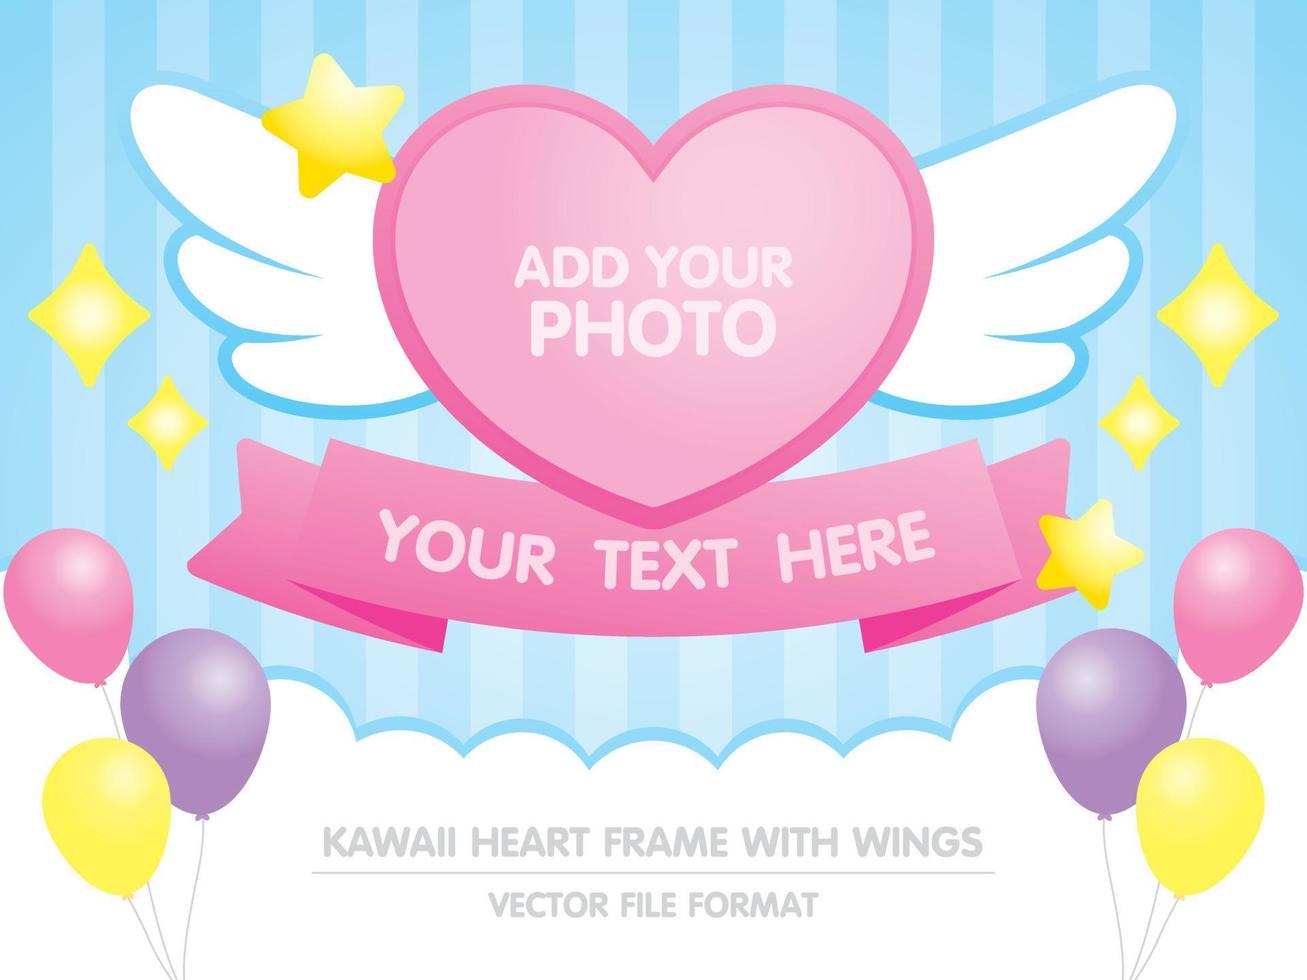 kawaii heart shape photo frame with cute wings and ribbon element for adding your text on blue striped background with cloud and balloon vector